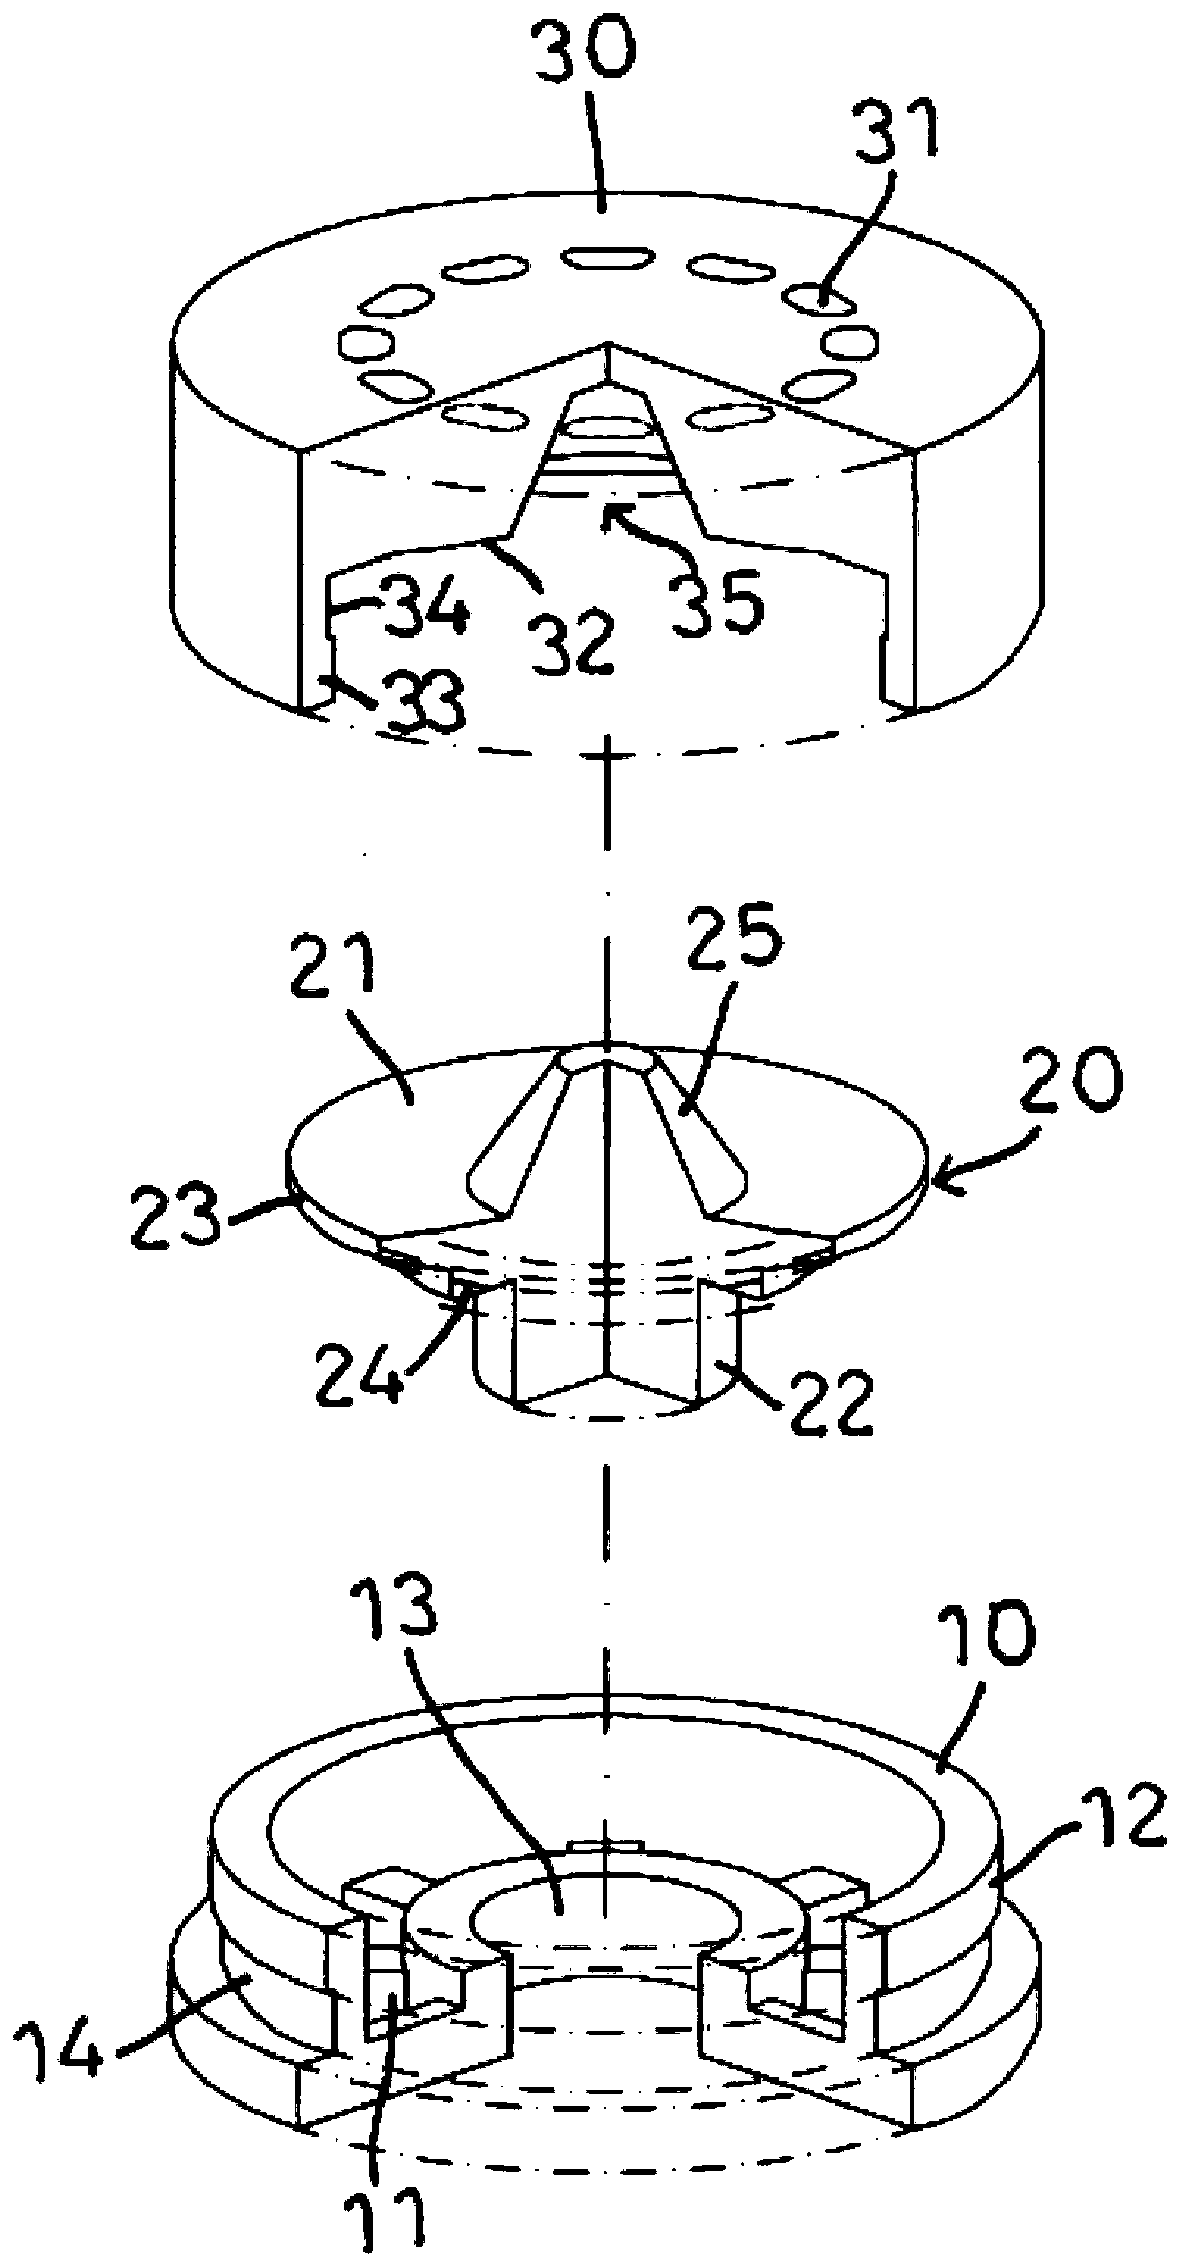 Unidirectional water top and pressure relief device